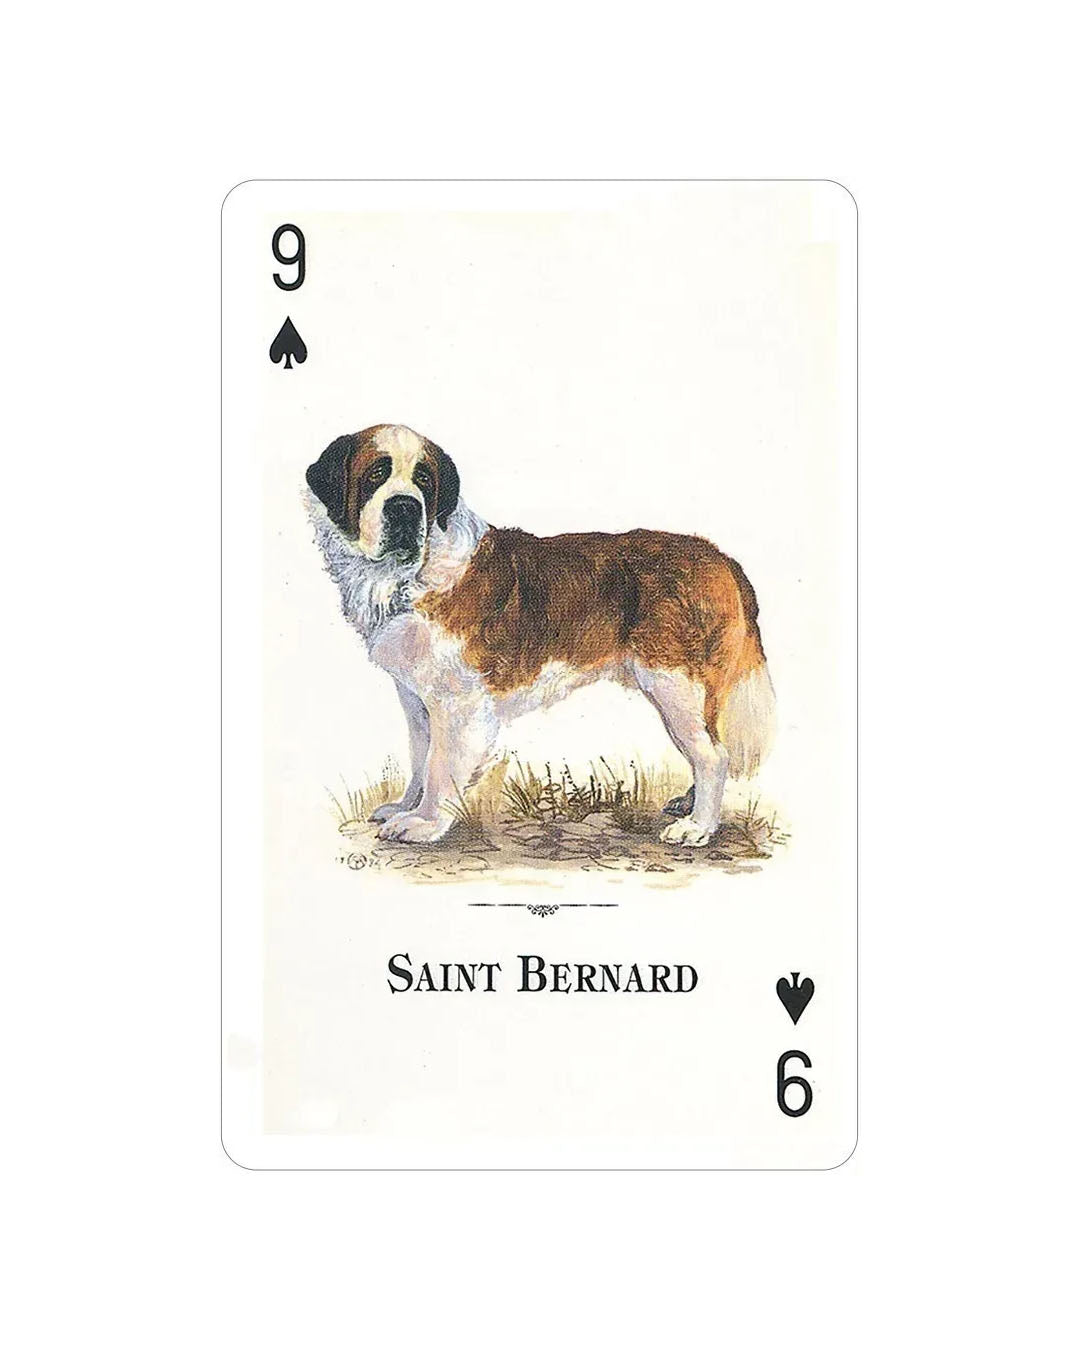 Dogs of the World Playing Cards